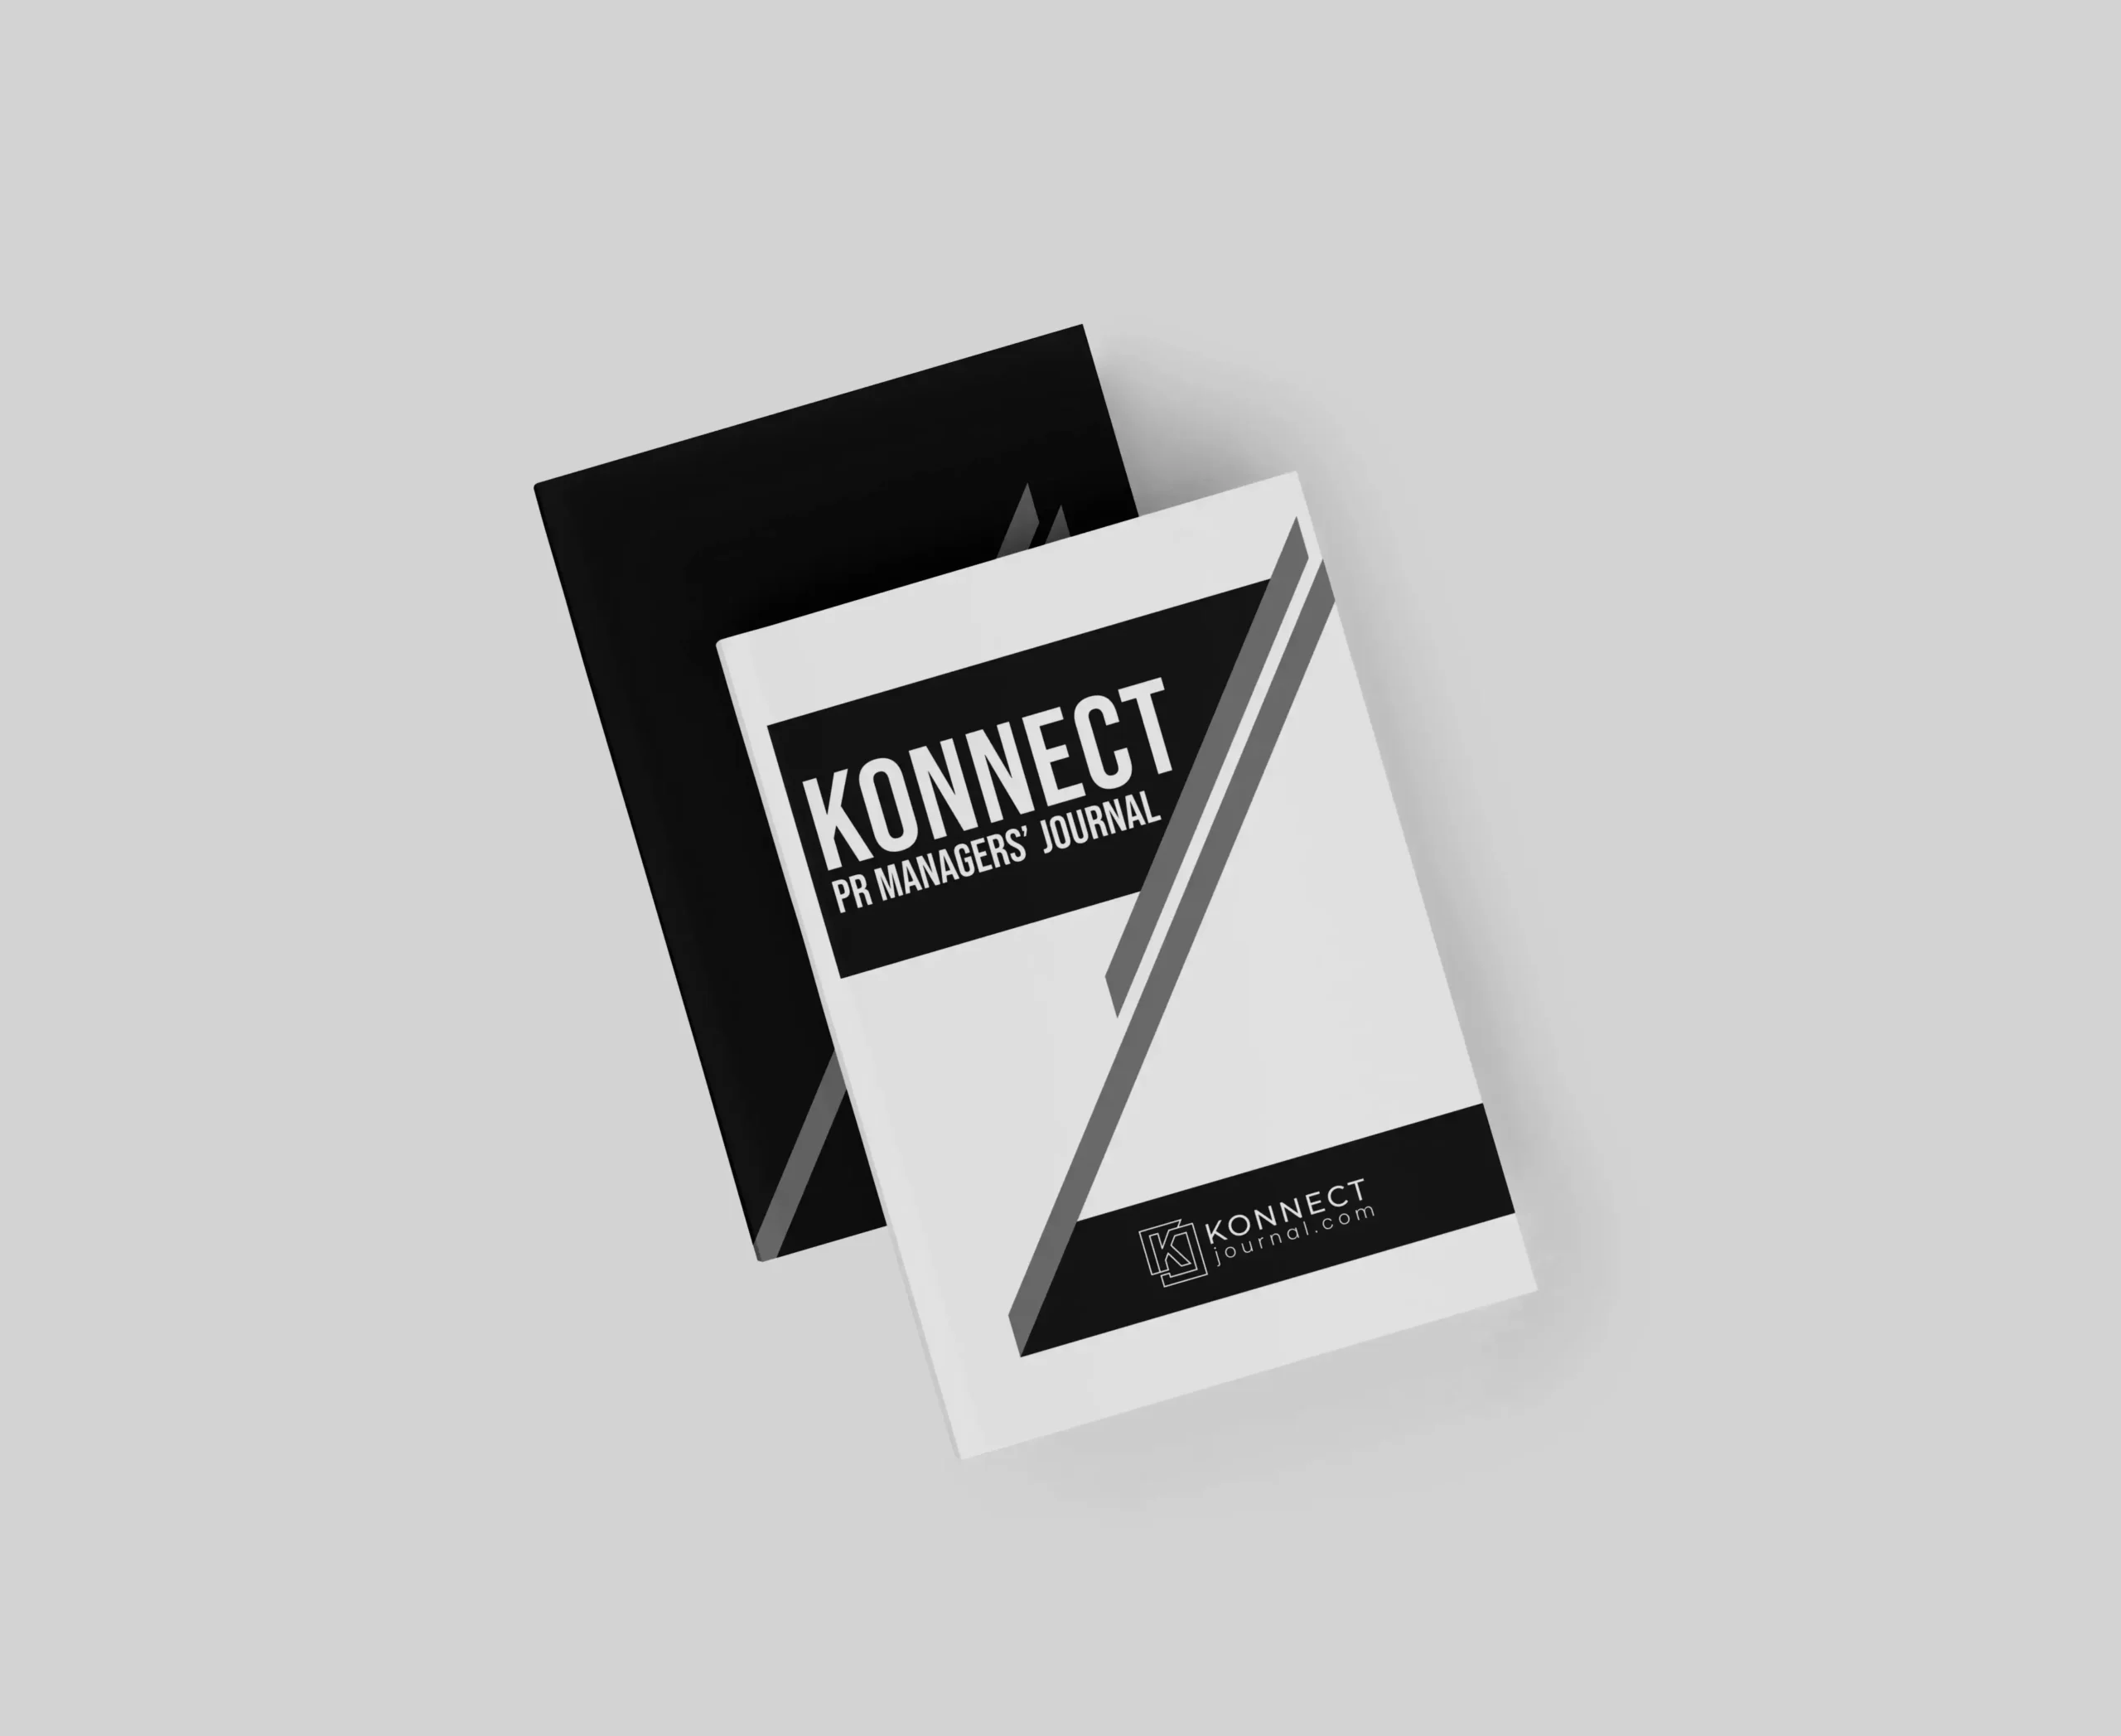 Konnect PR Managers’ Journal